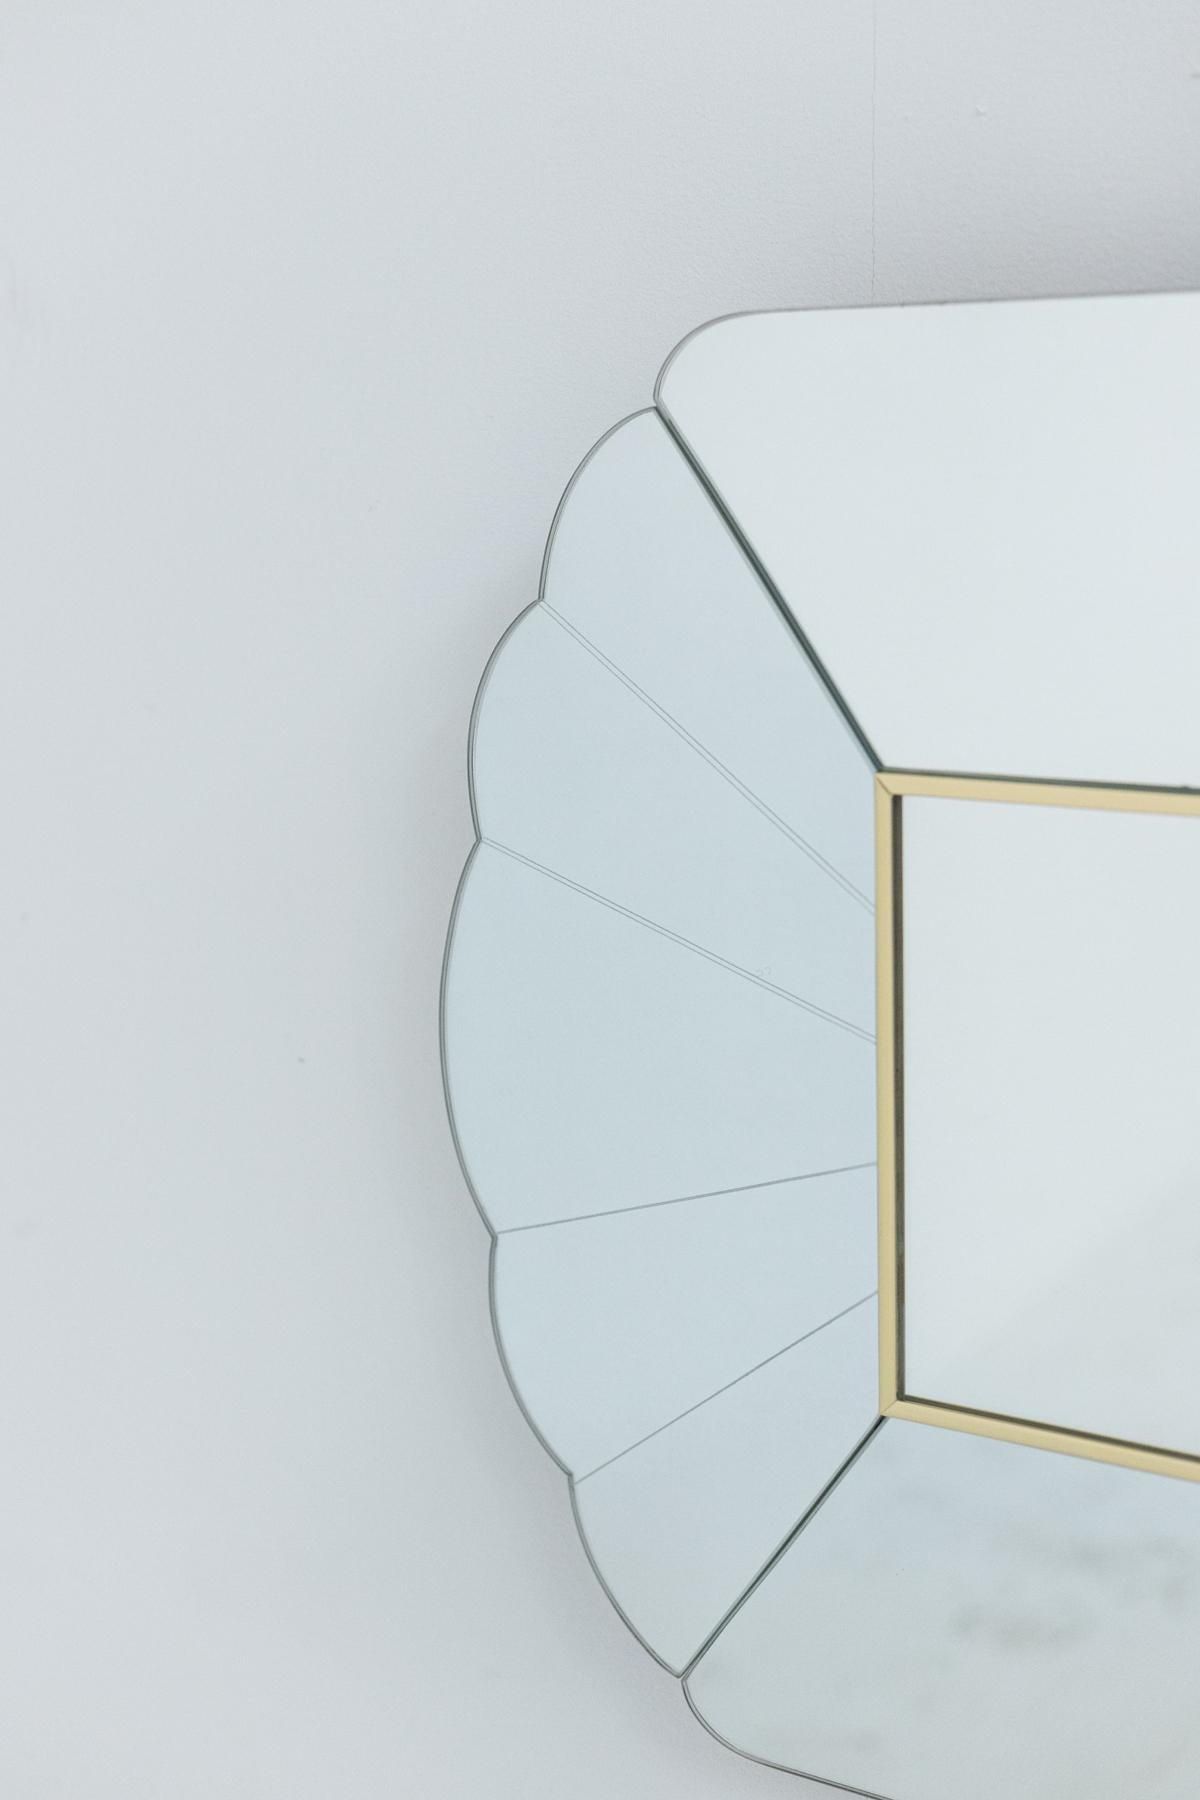 Wonderful mirror designed by Alain Delon for Maison Jansen manufacture in the 70's. On the back of the mirror in the lower right corner is inserted a brass plaque that bears the signature of Alain Delon.
The mirror is made of mirrored glass